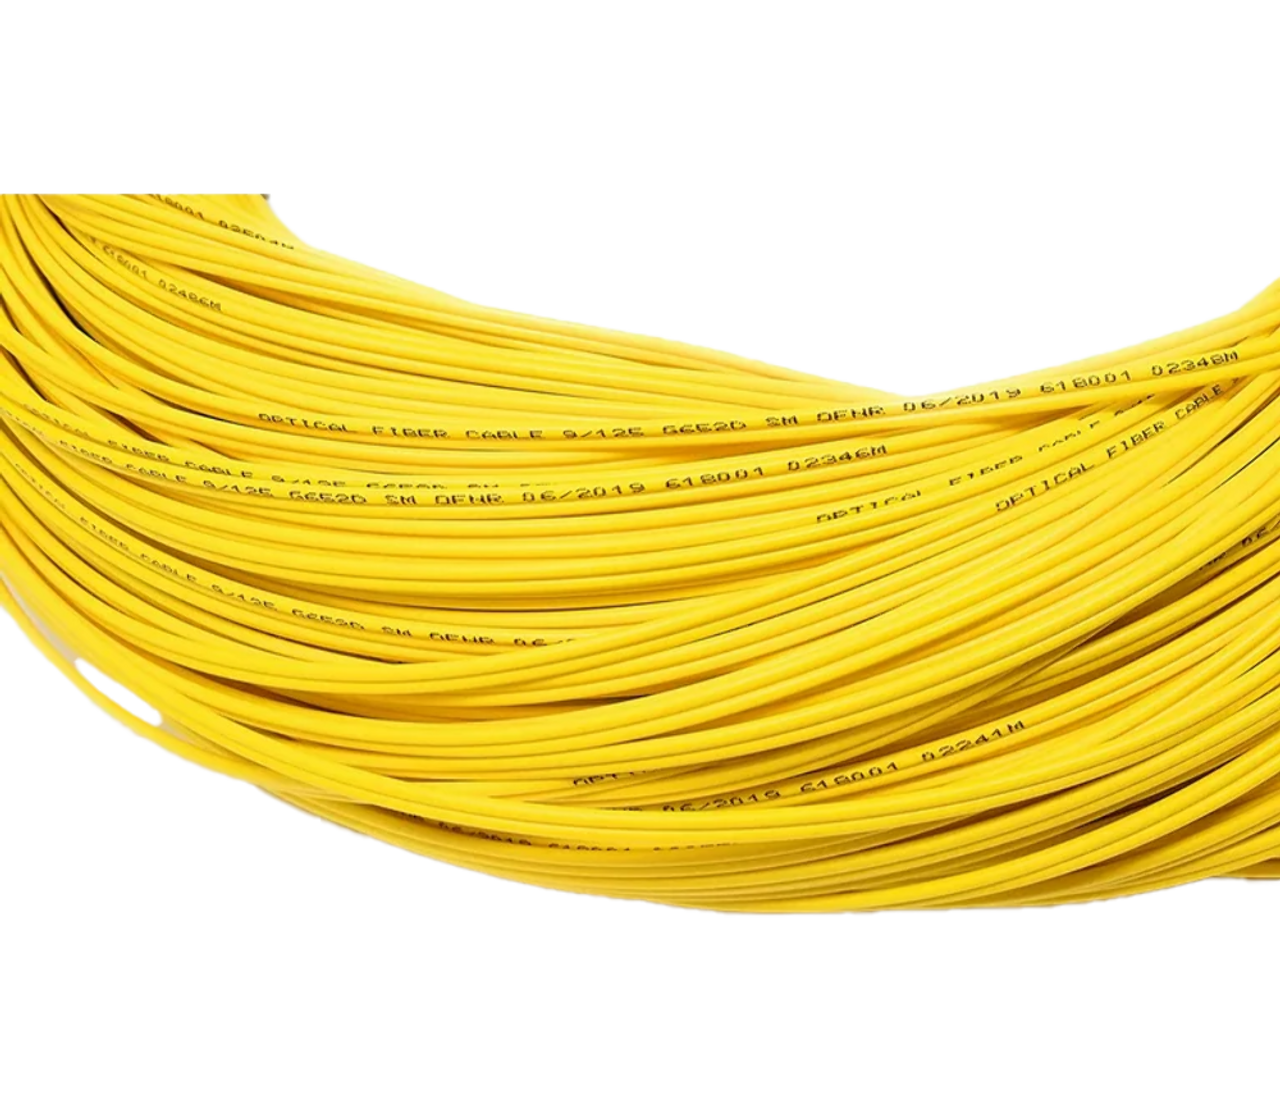 Powell FCSM2LCST Fiber Optic Cable 60FT 9/125 Yellow Jacket